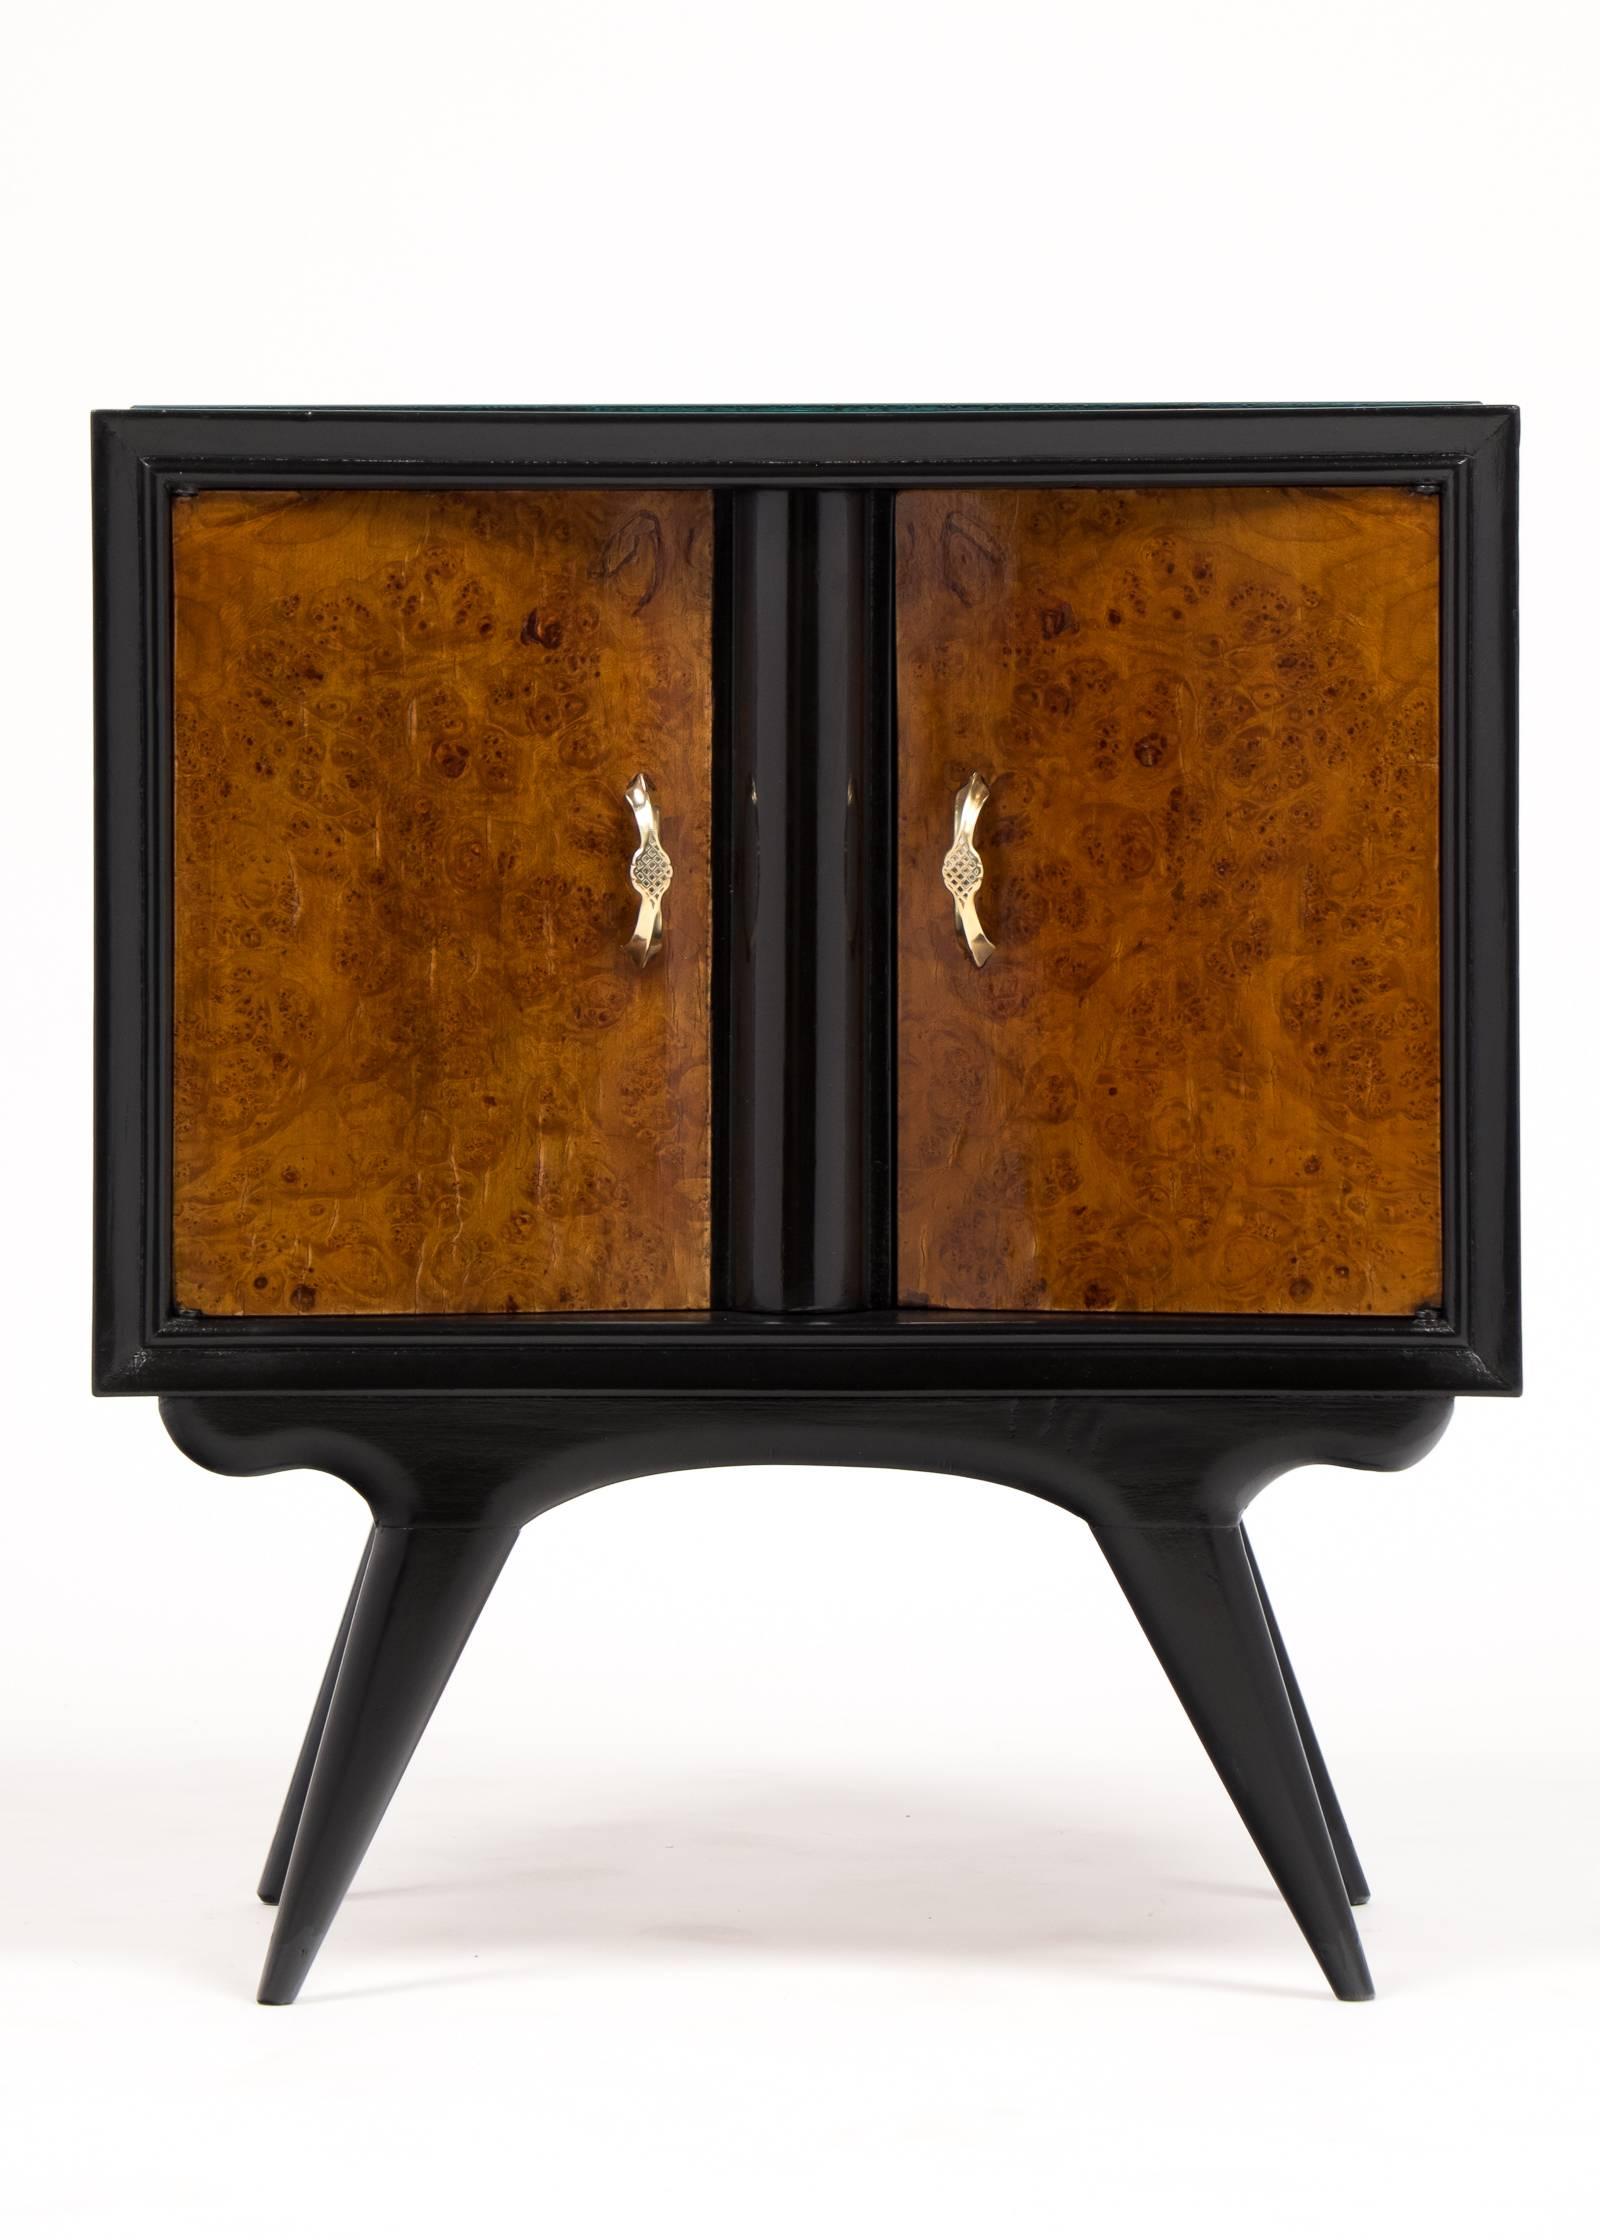 Polished Italian Modernist Pair of Side Tables in the Manner of Paolo Buffa